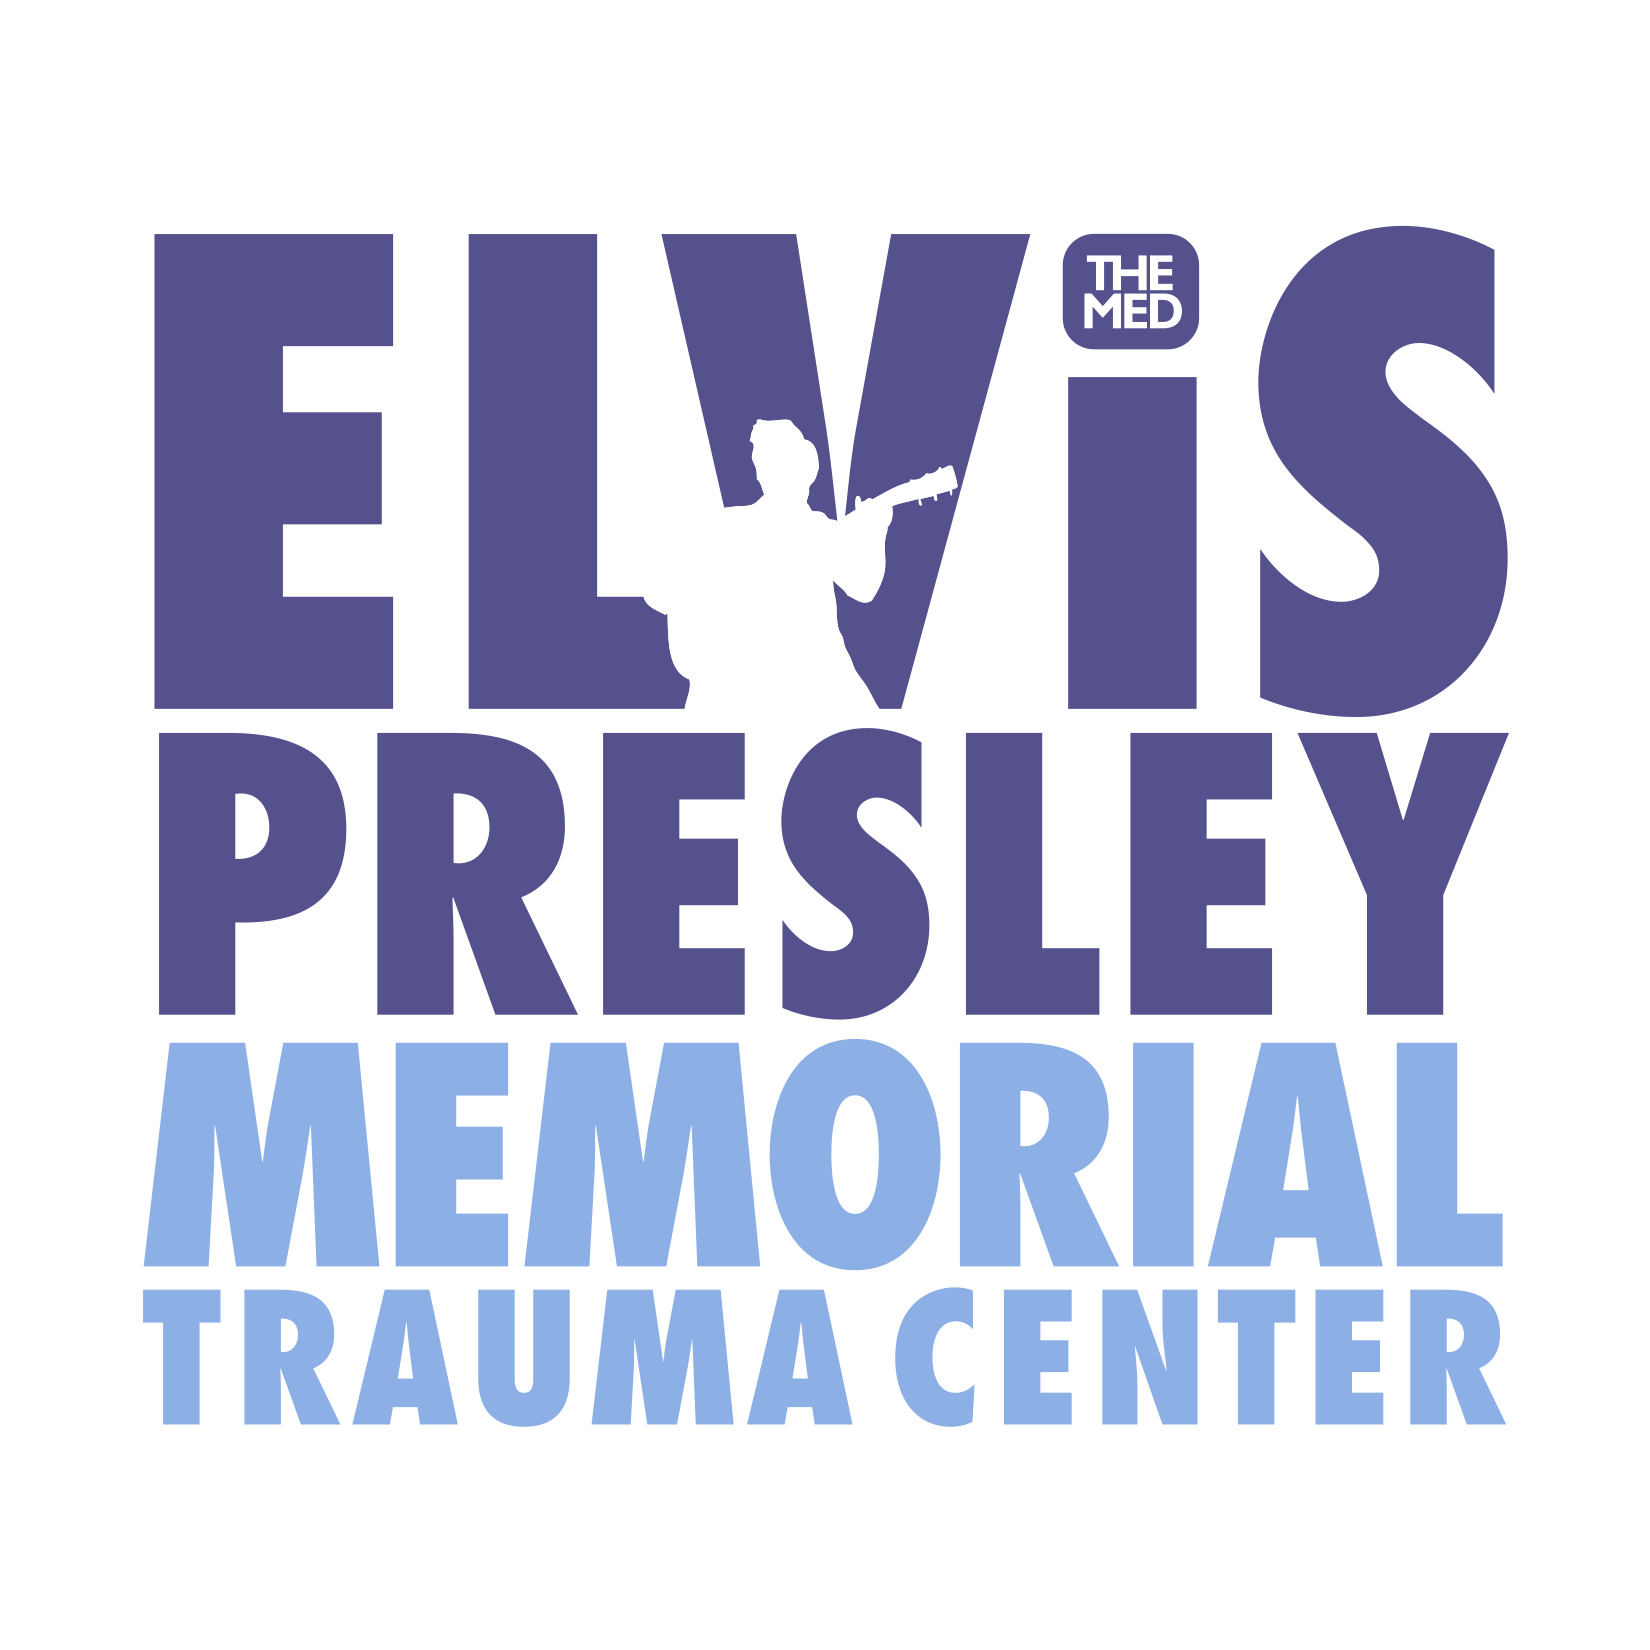  Elvis Presley Trauma Center brand and wearables logo  © EPE, Reg. U.S. Pat. &amp; TM Off.  Branding creative and design by Chuck Mitchell  The MED logo by the late Bill Womack 